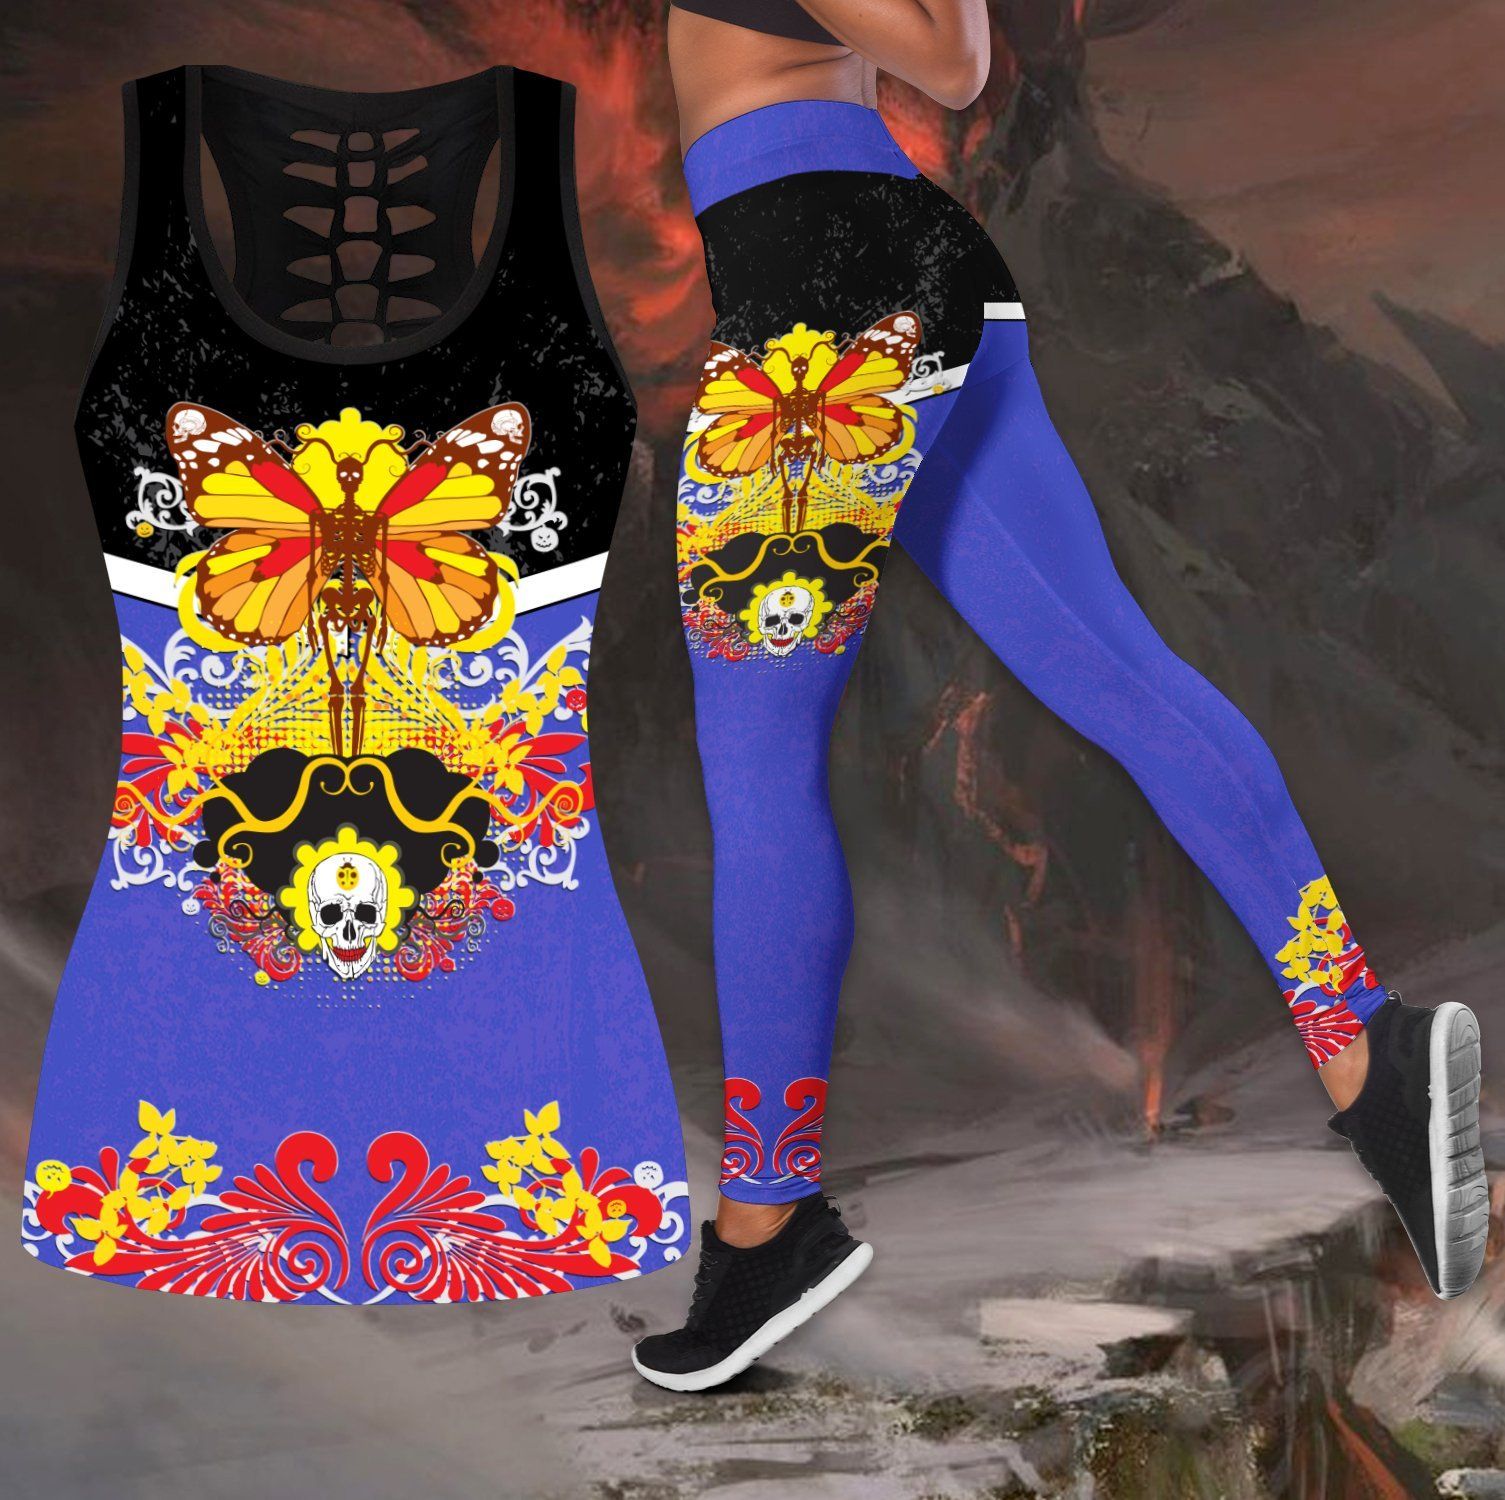 Butterfly Love Skull and Tattoos tanktop & legging outfit for women QB05192002